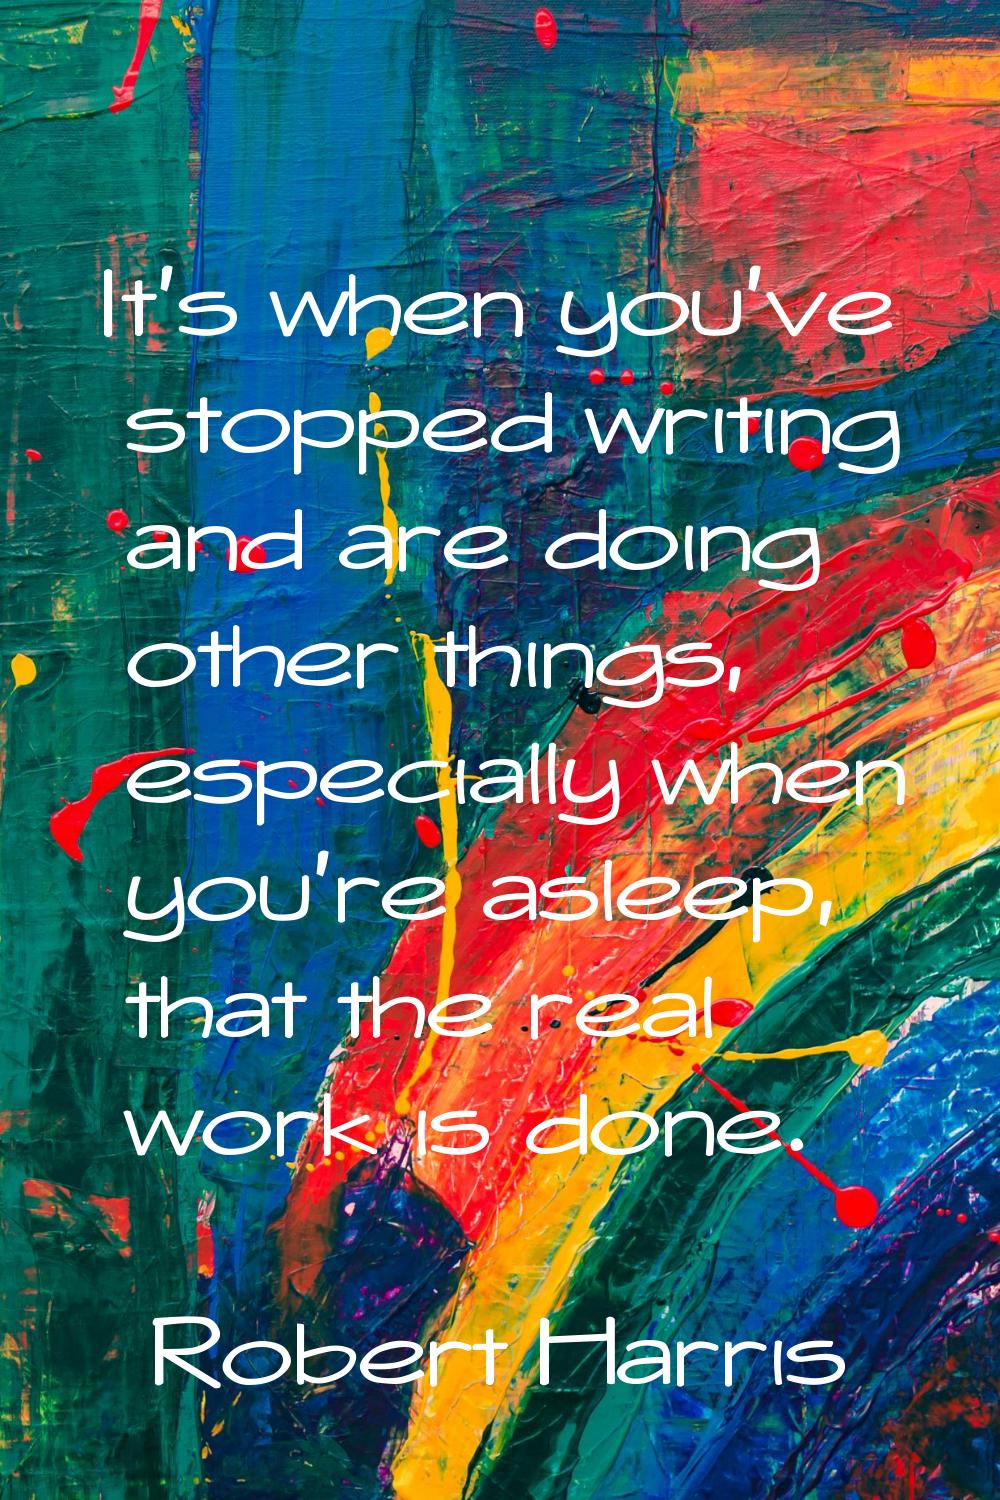 It's when you've stopped writing and are doing other things, especially when you're asleep, that th